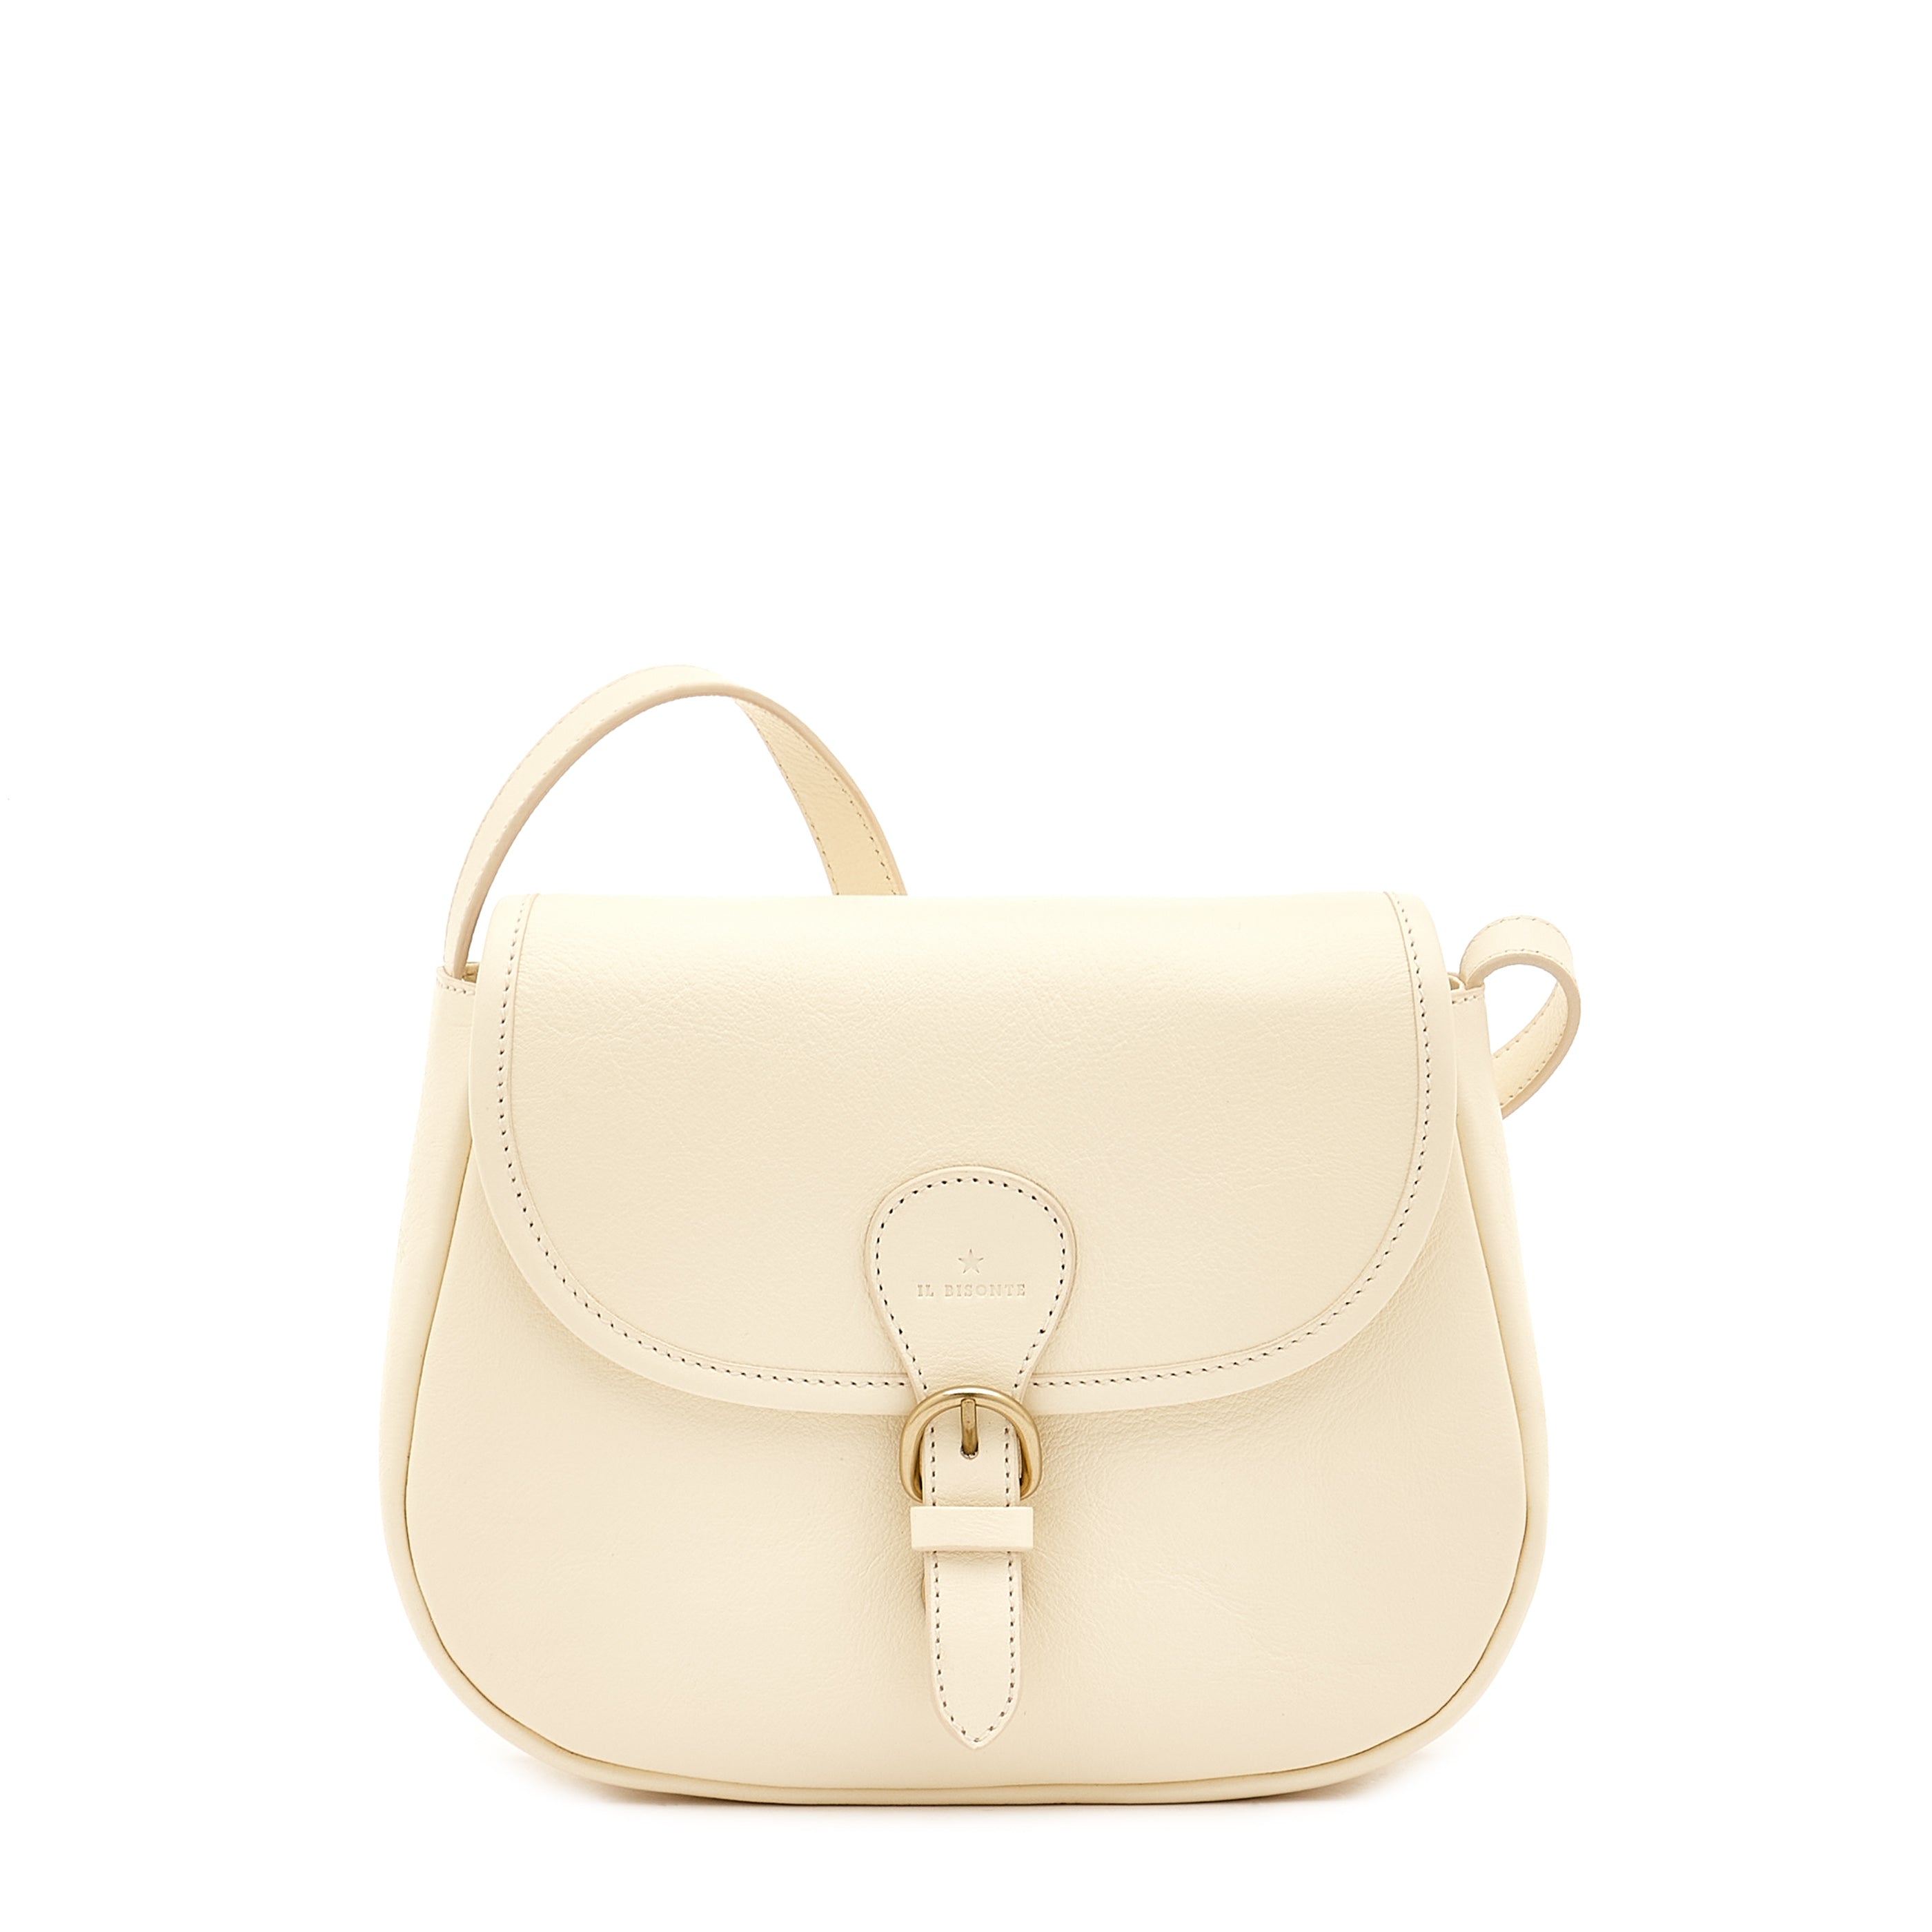 Novecento | Women's crossbody bag in leather color white